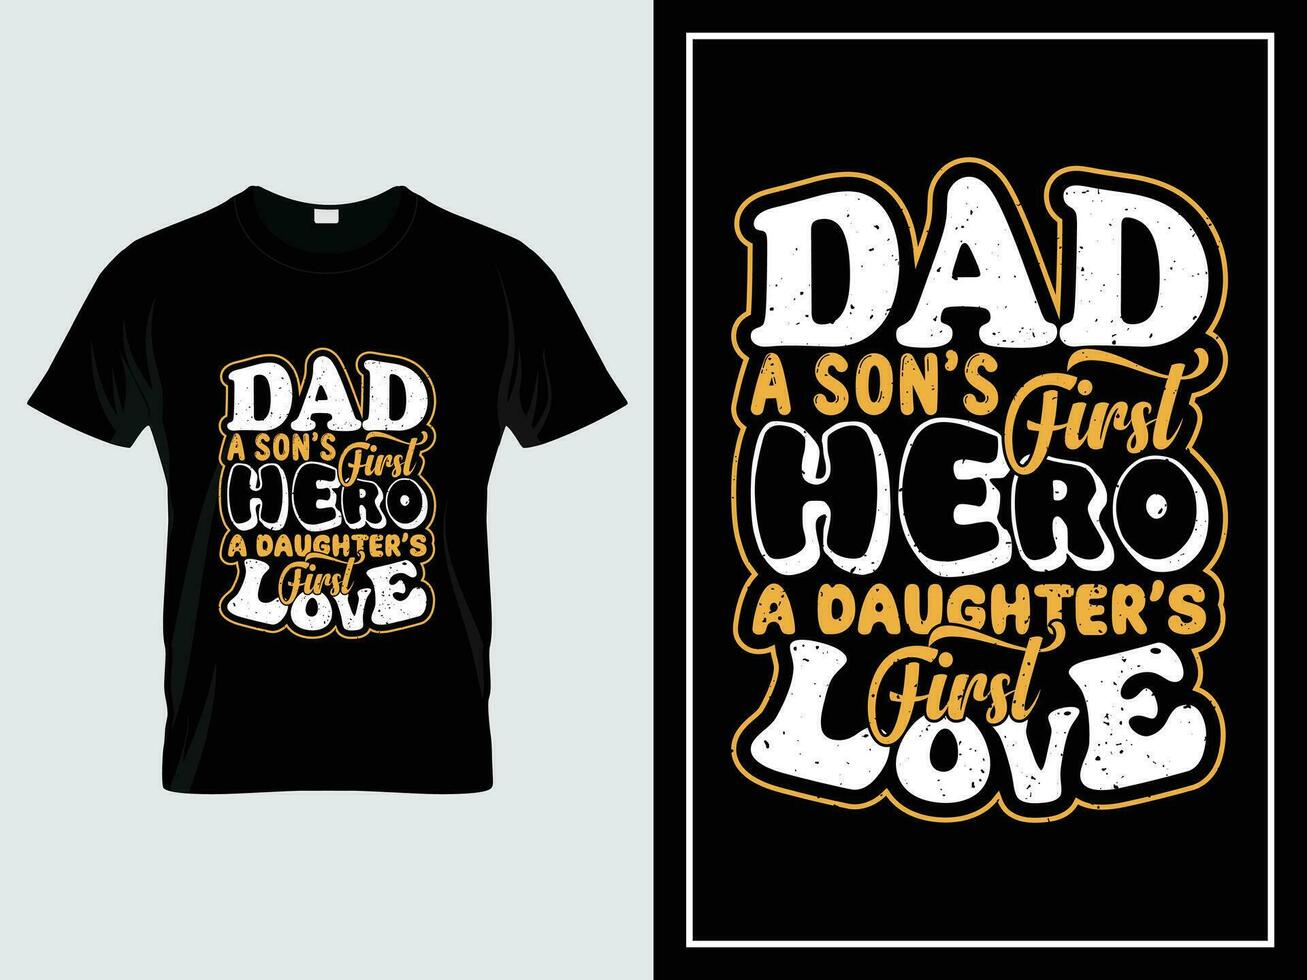 Dad typography t shirt design vector vintage style, Dad A sons first hero, a daughters first love